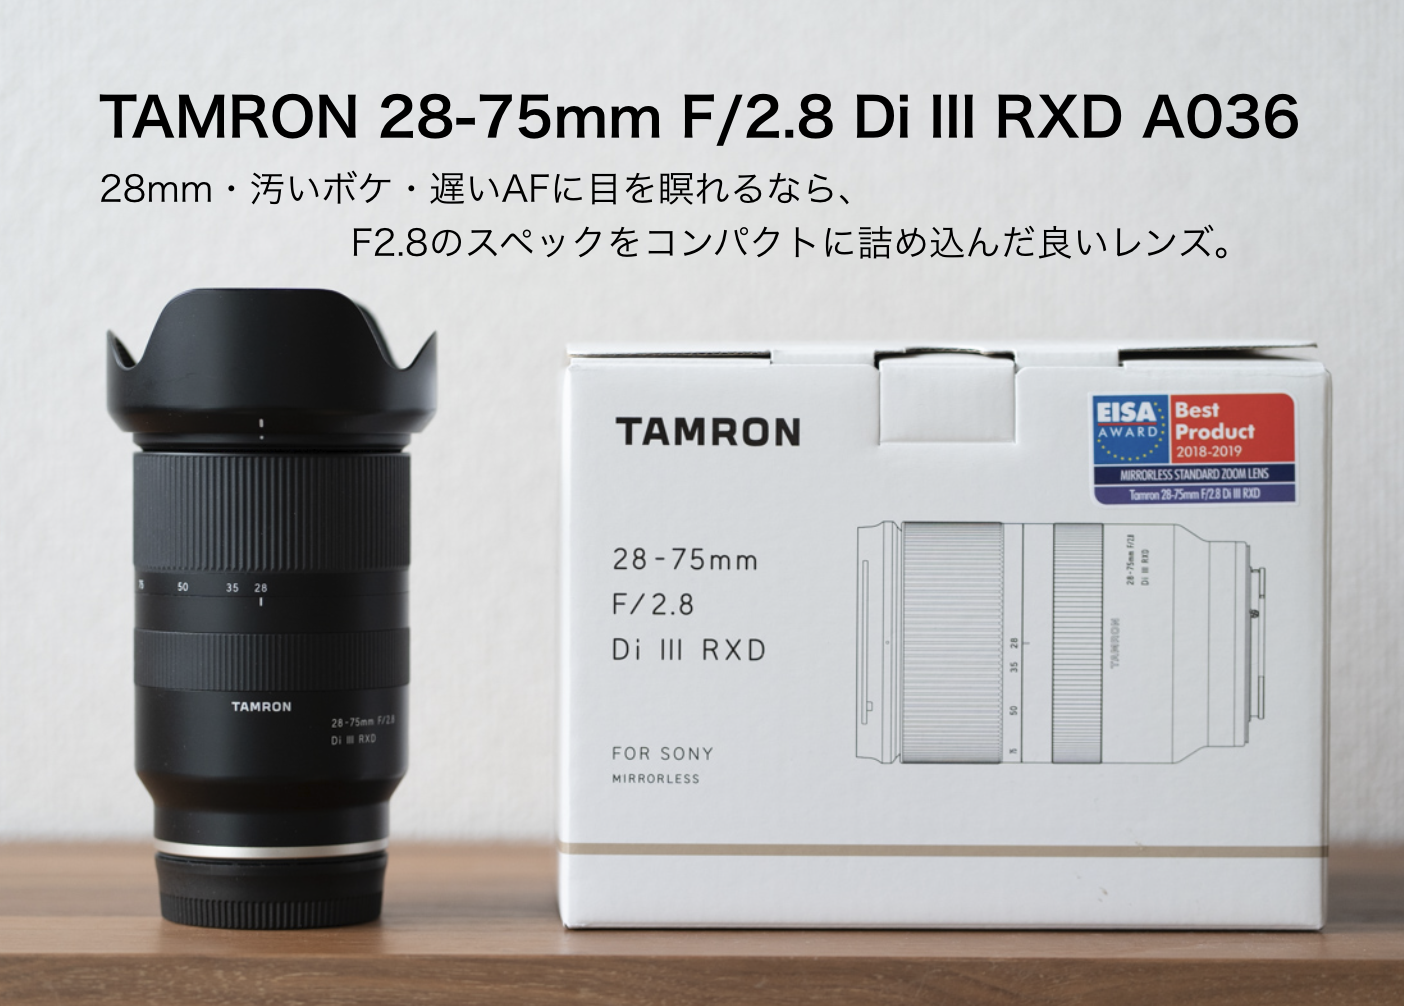 TAMRON 28-75mm F/2.8 Di III RXD A036 は28mm・汚いボケ・遅いAFに目 